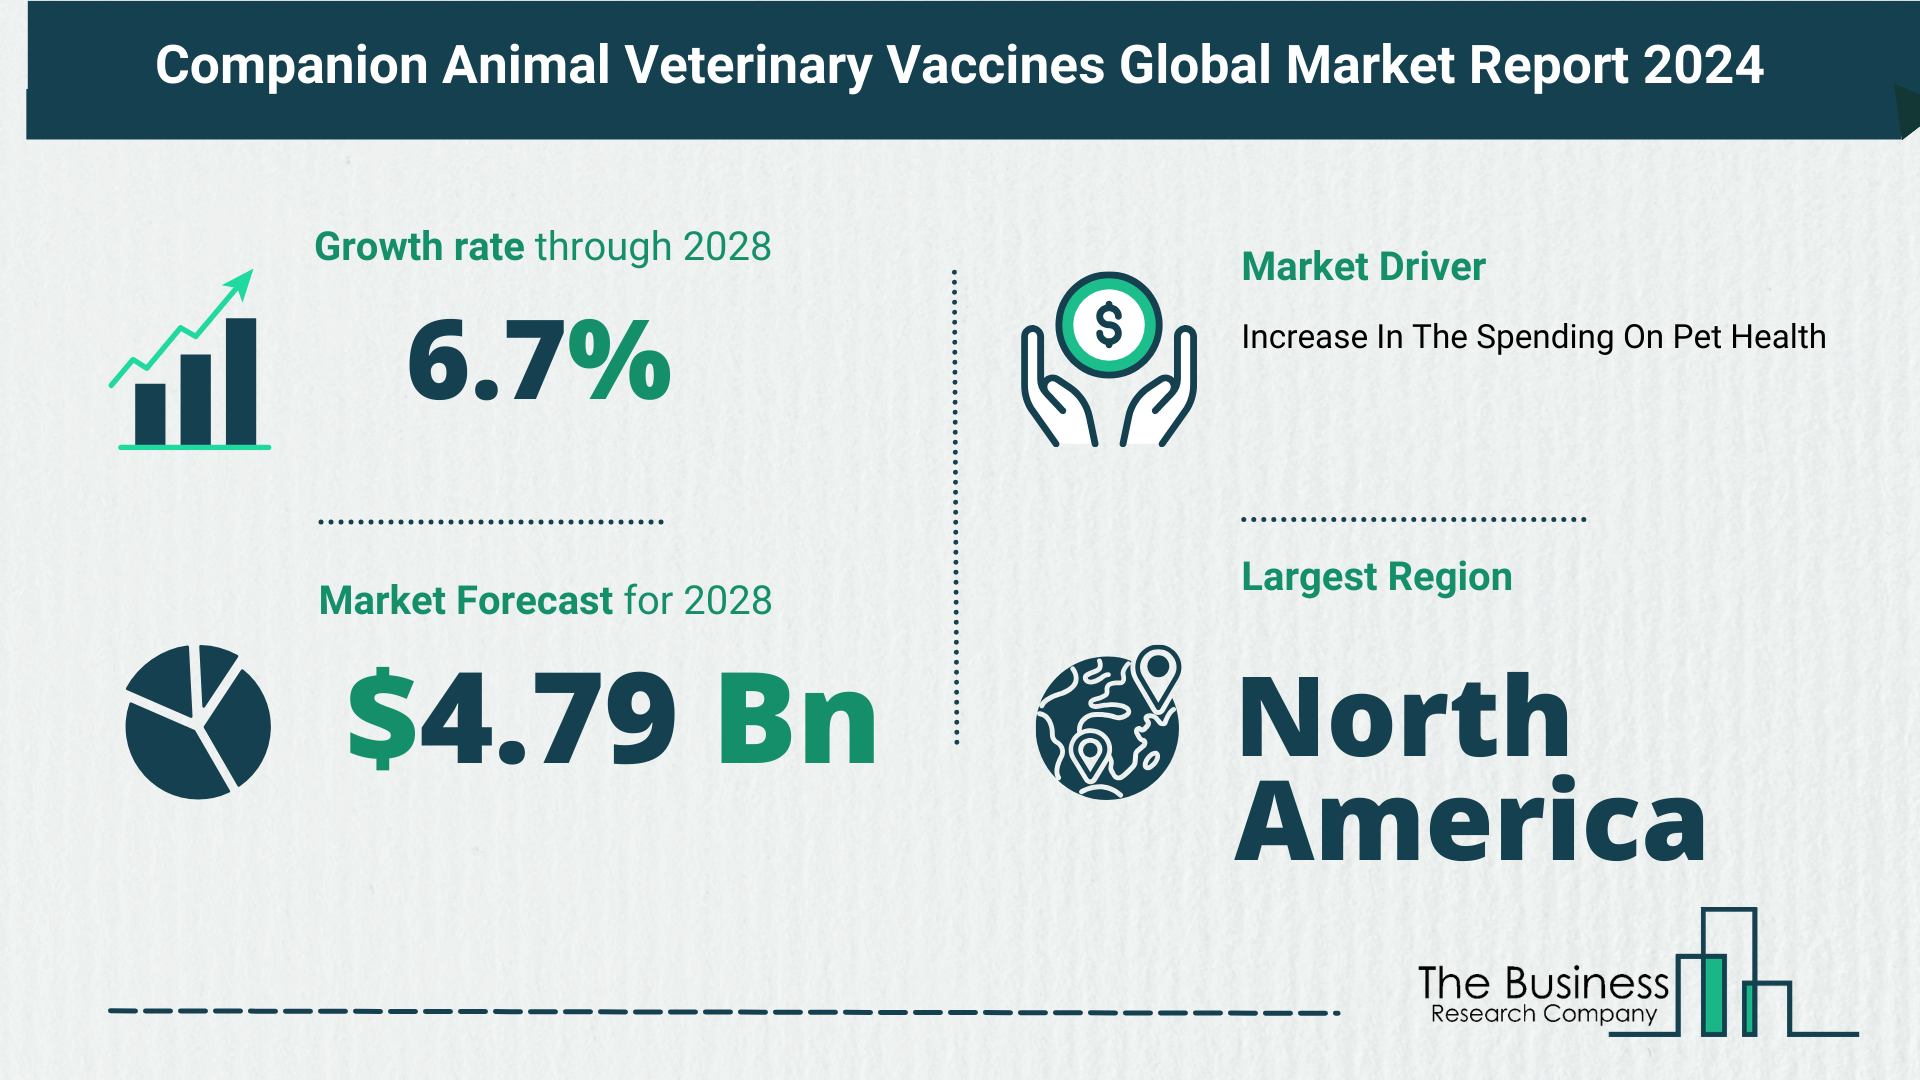 What Is The Forecast Growth Rate For The Companion Animal Veterinary Vaccines Market?